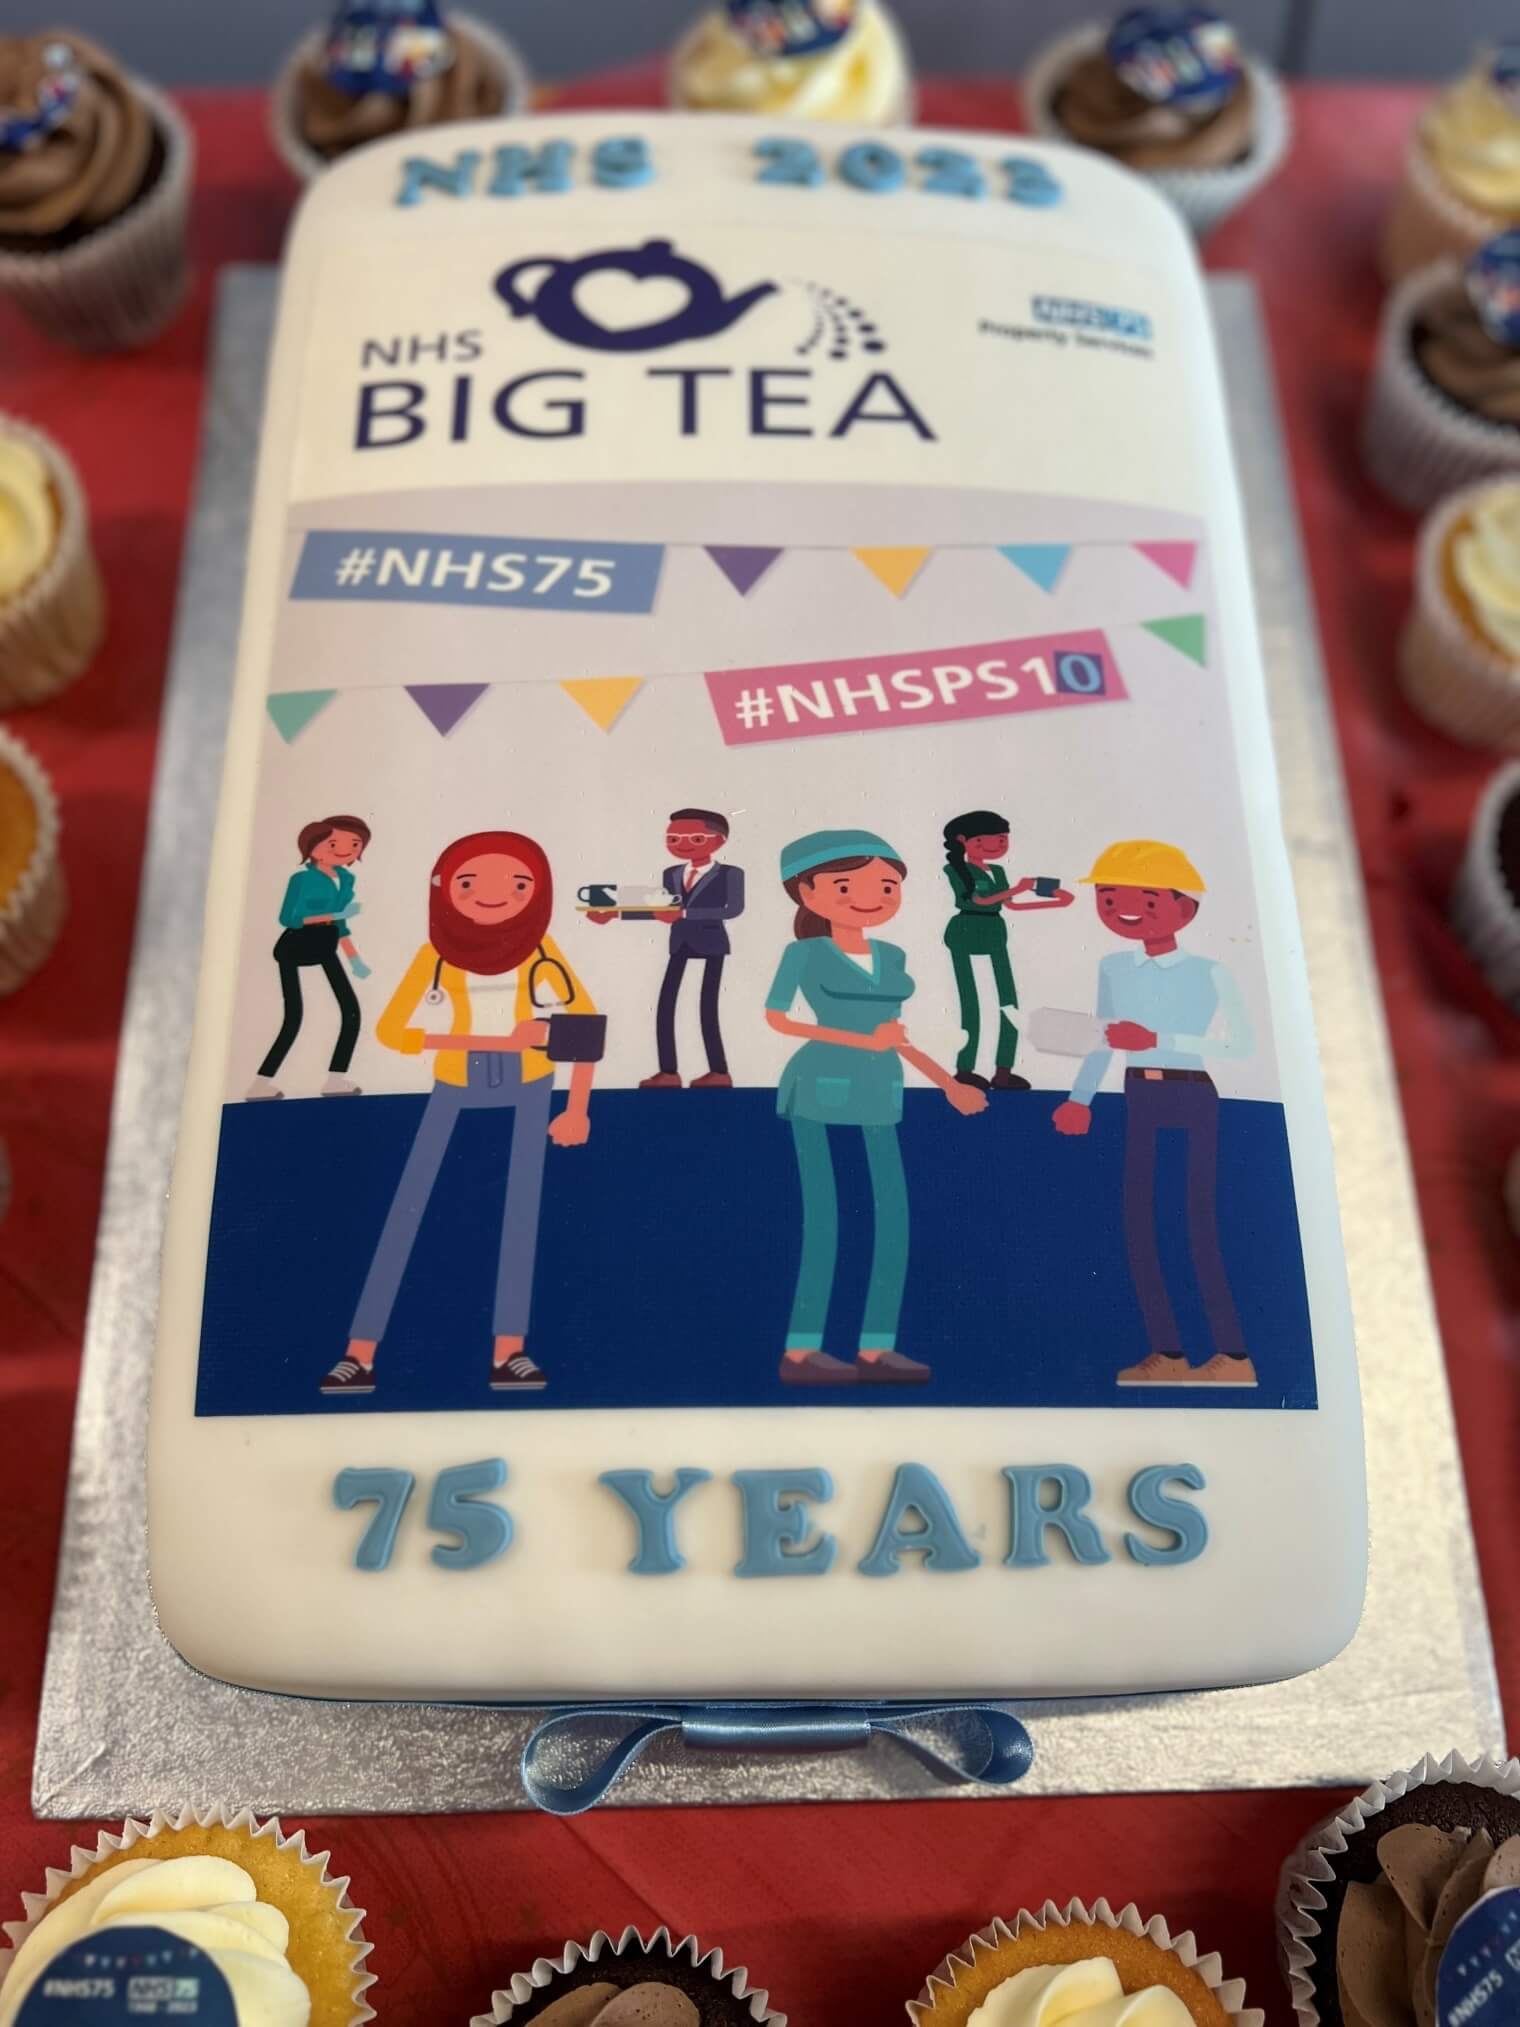 NHSPS joins the annual NHS Big Tea event at Johnson Community Hospital in Pinchbeck, Lincolnshire